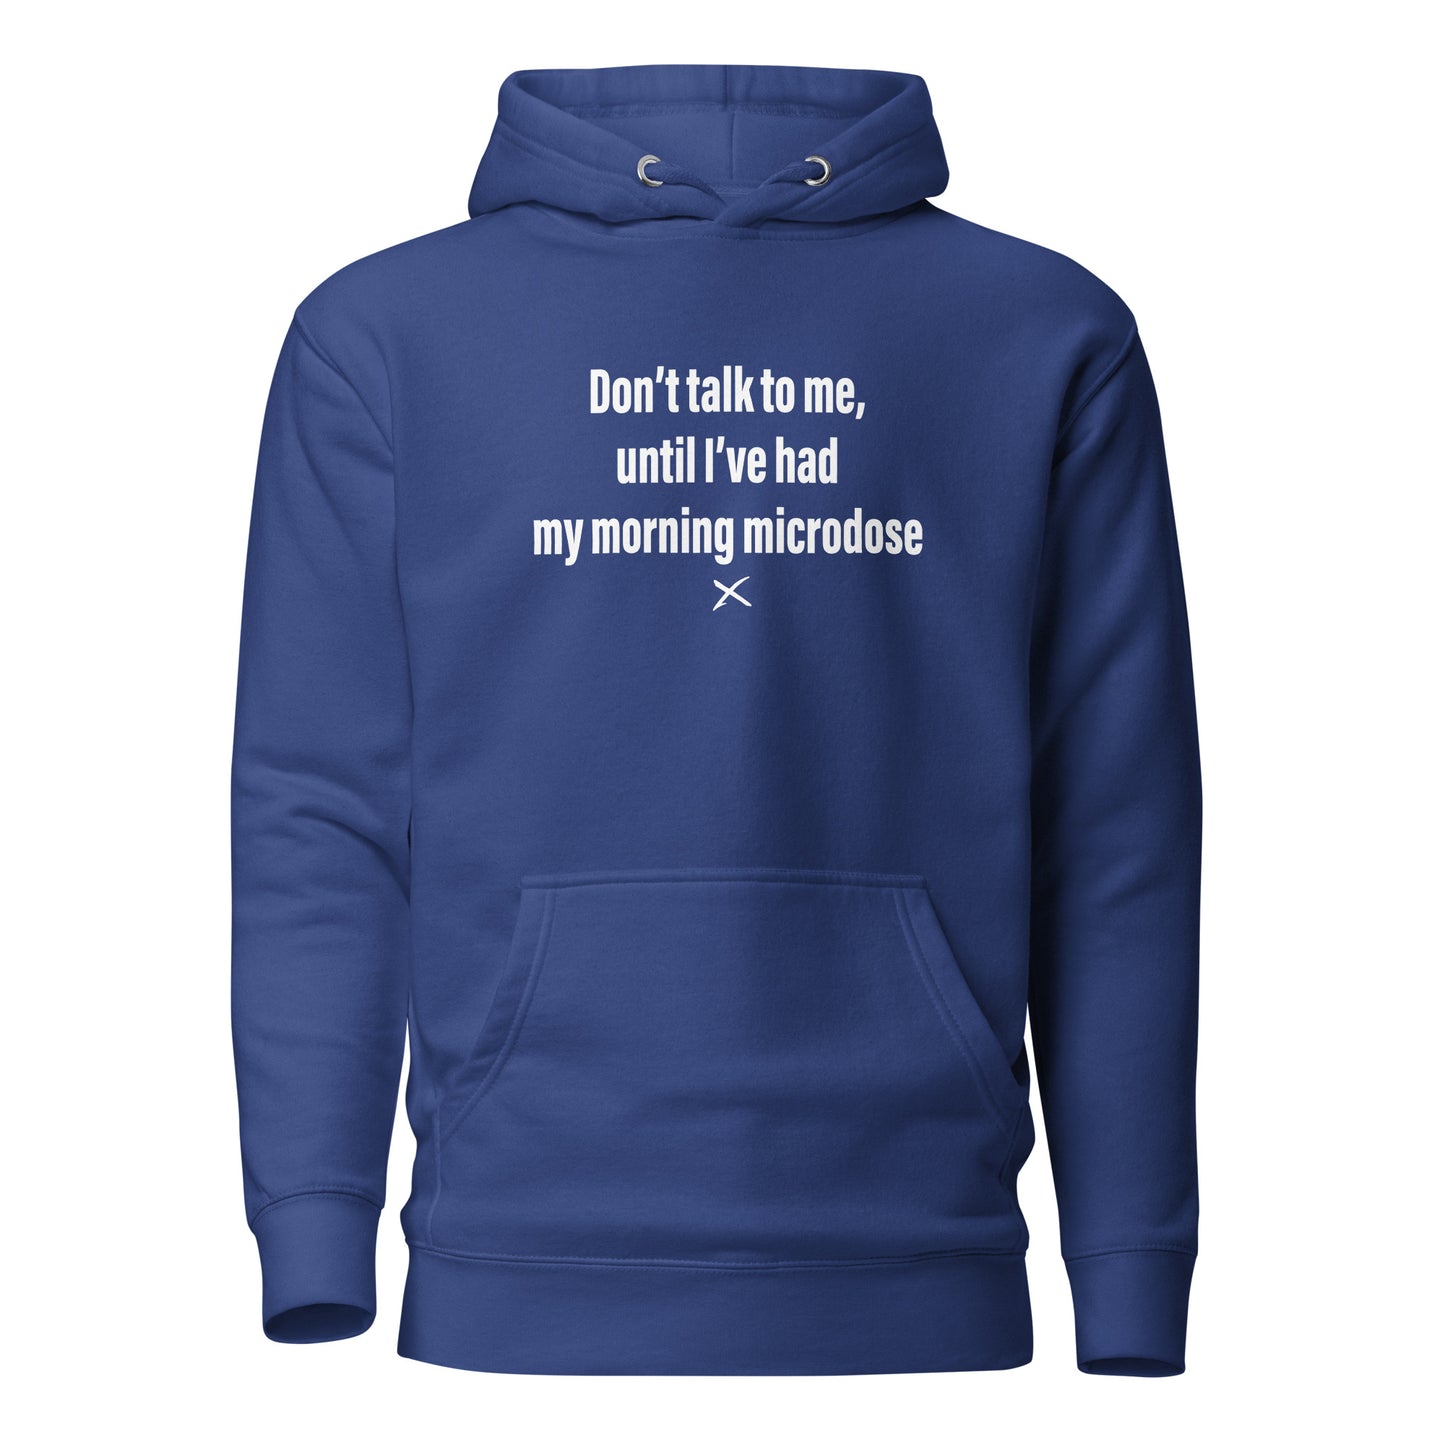 Don't talk to me, until I've had my morning microdose - Hoodie